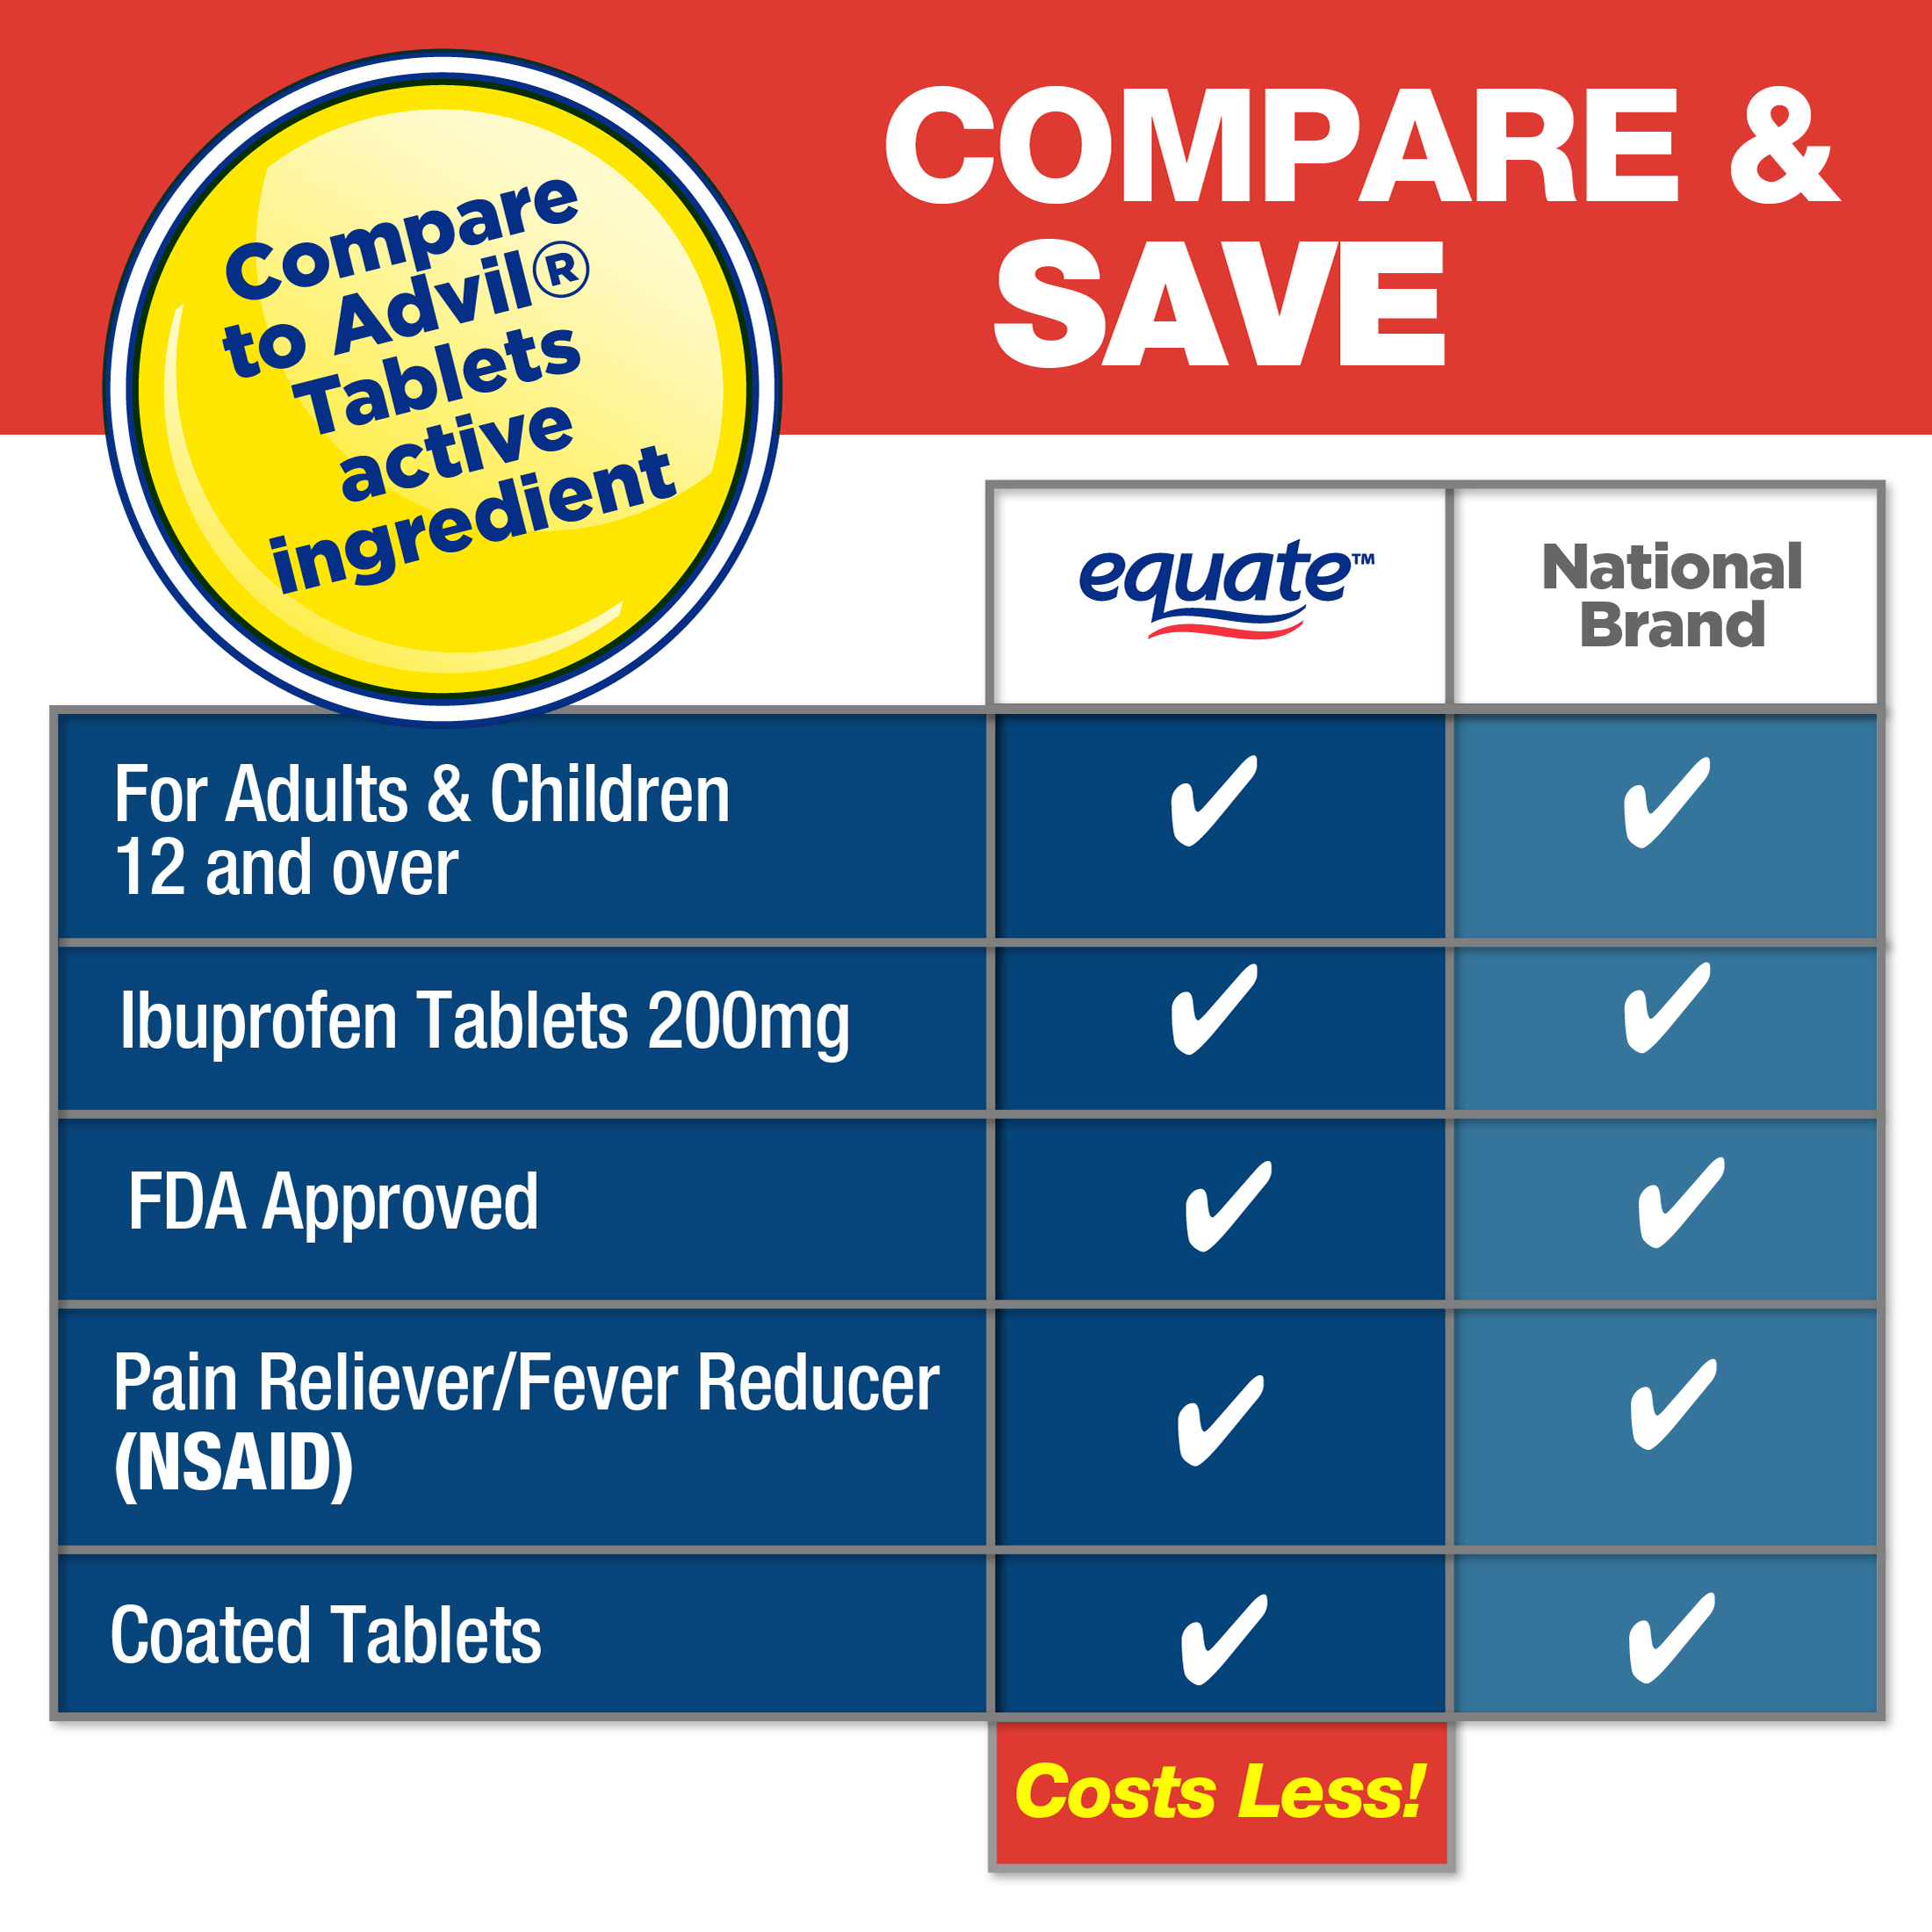 Equate Ibuprofen Tablets 200 mg, Pain Reliever/Fever Reducer, Twin Pack, 1000 Count - image 3 of 7